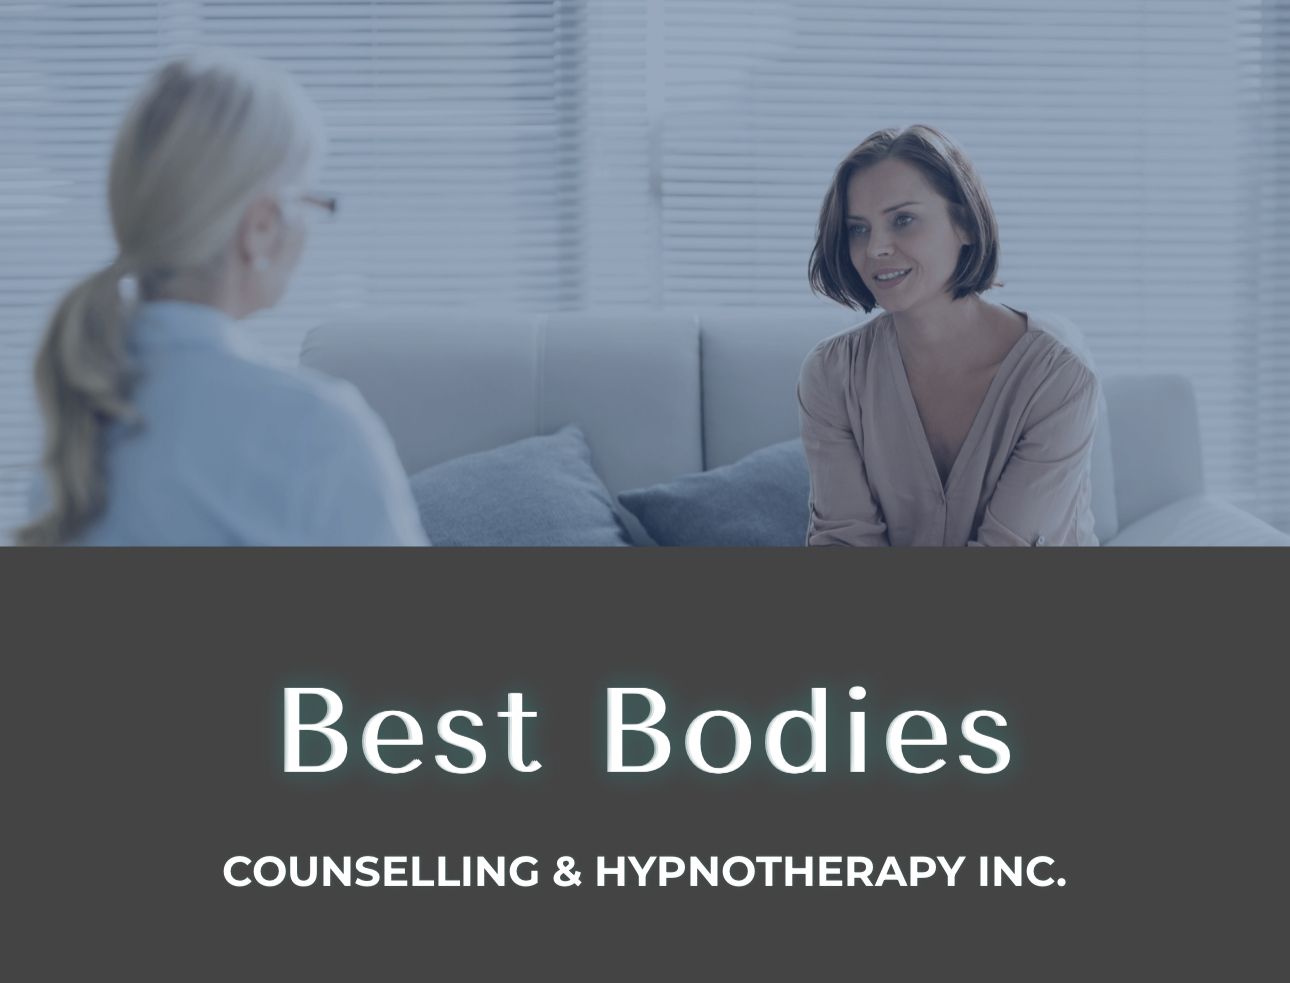 Best Bodies Counselling & Hypnotherapy Inc.